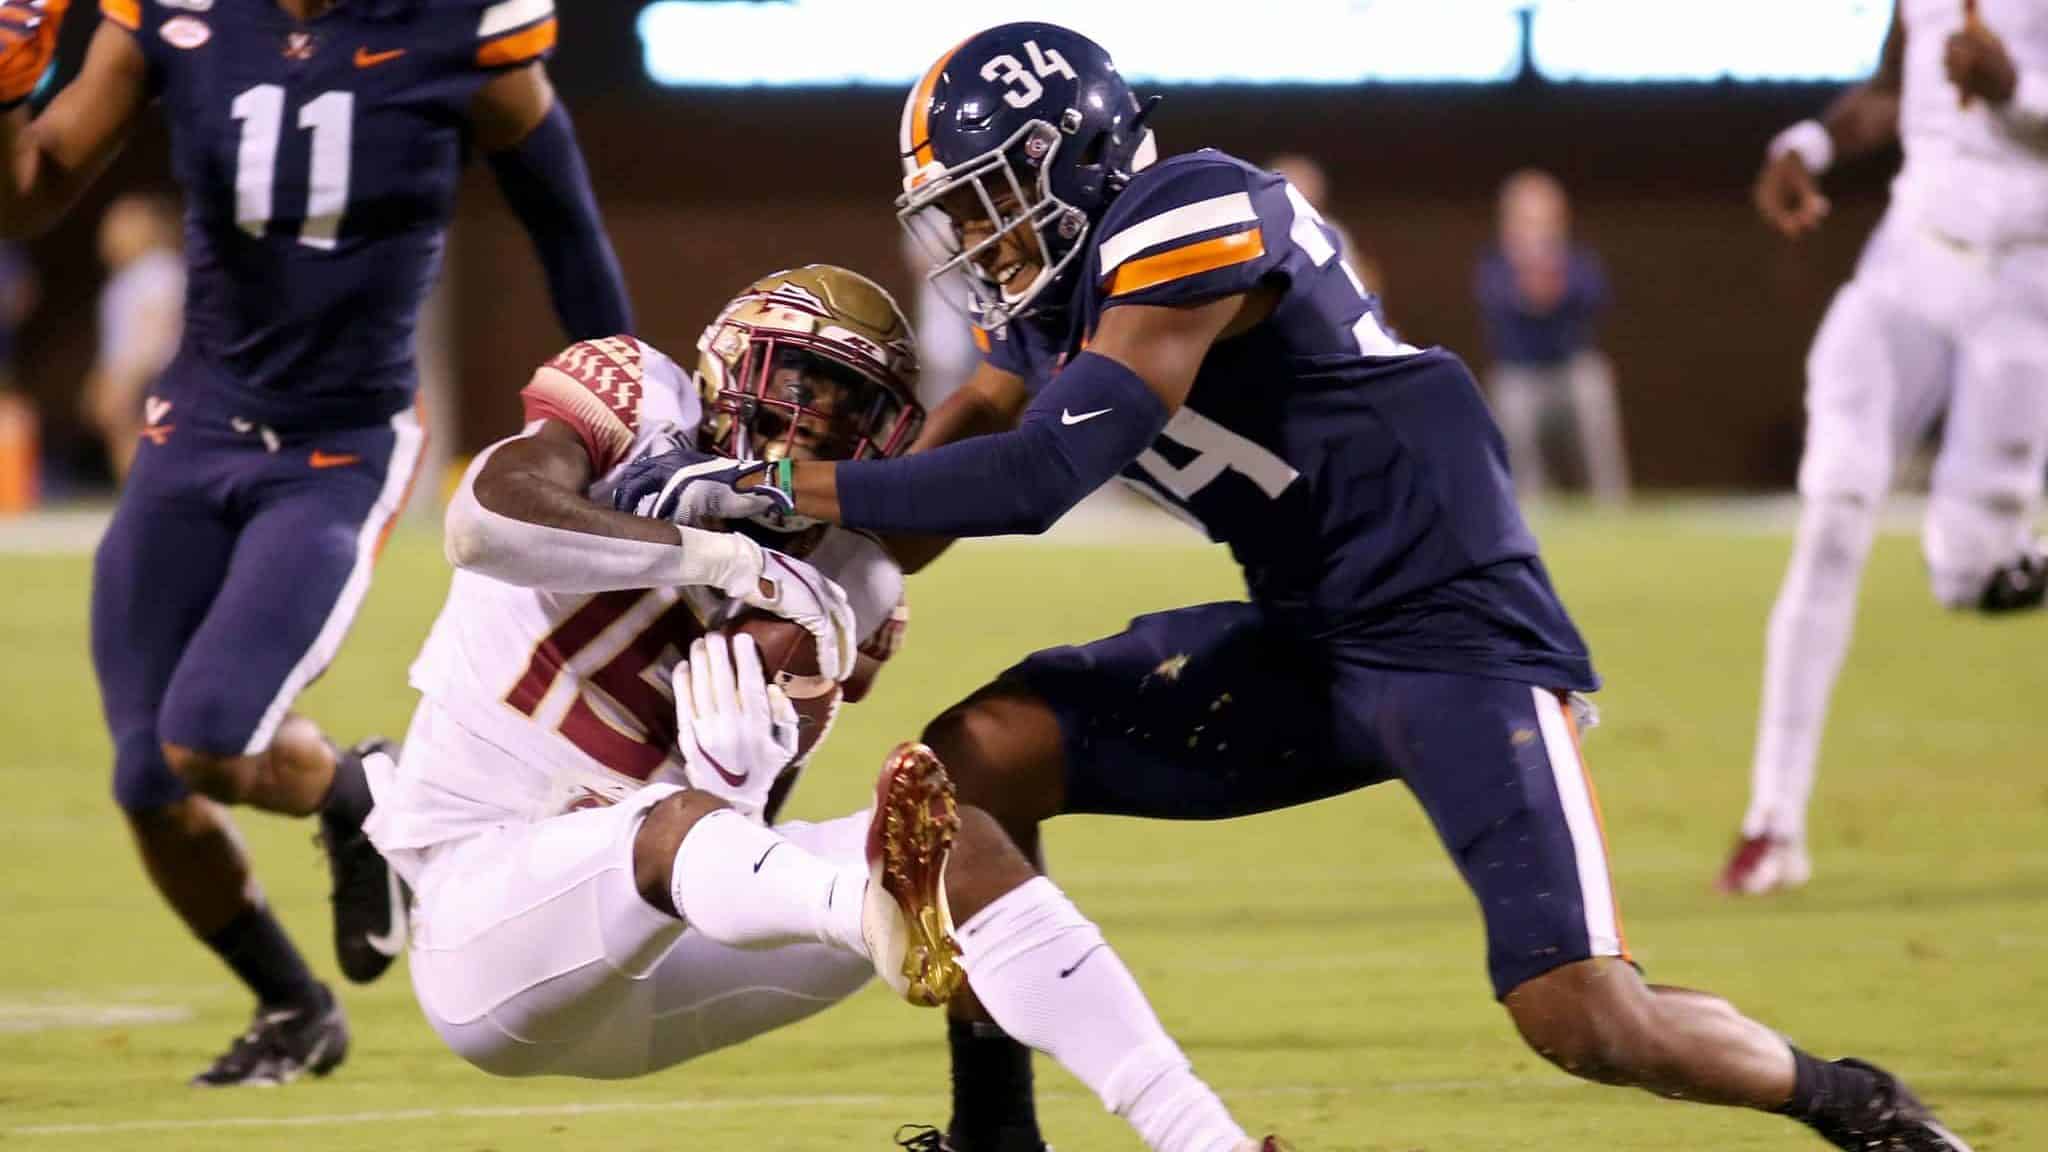 CHARLOTTESVILLE, VA - SEPTEMBER 14: Bryce Hall #34 of the Virginia Cavaliers breaks up a pass intended for Tamorrion Terry #15 of the Florida State Seminoles in the first half during a game at Scott Stadium on September 14, 2019 in Charlottesville, Virginia.